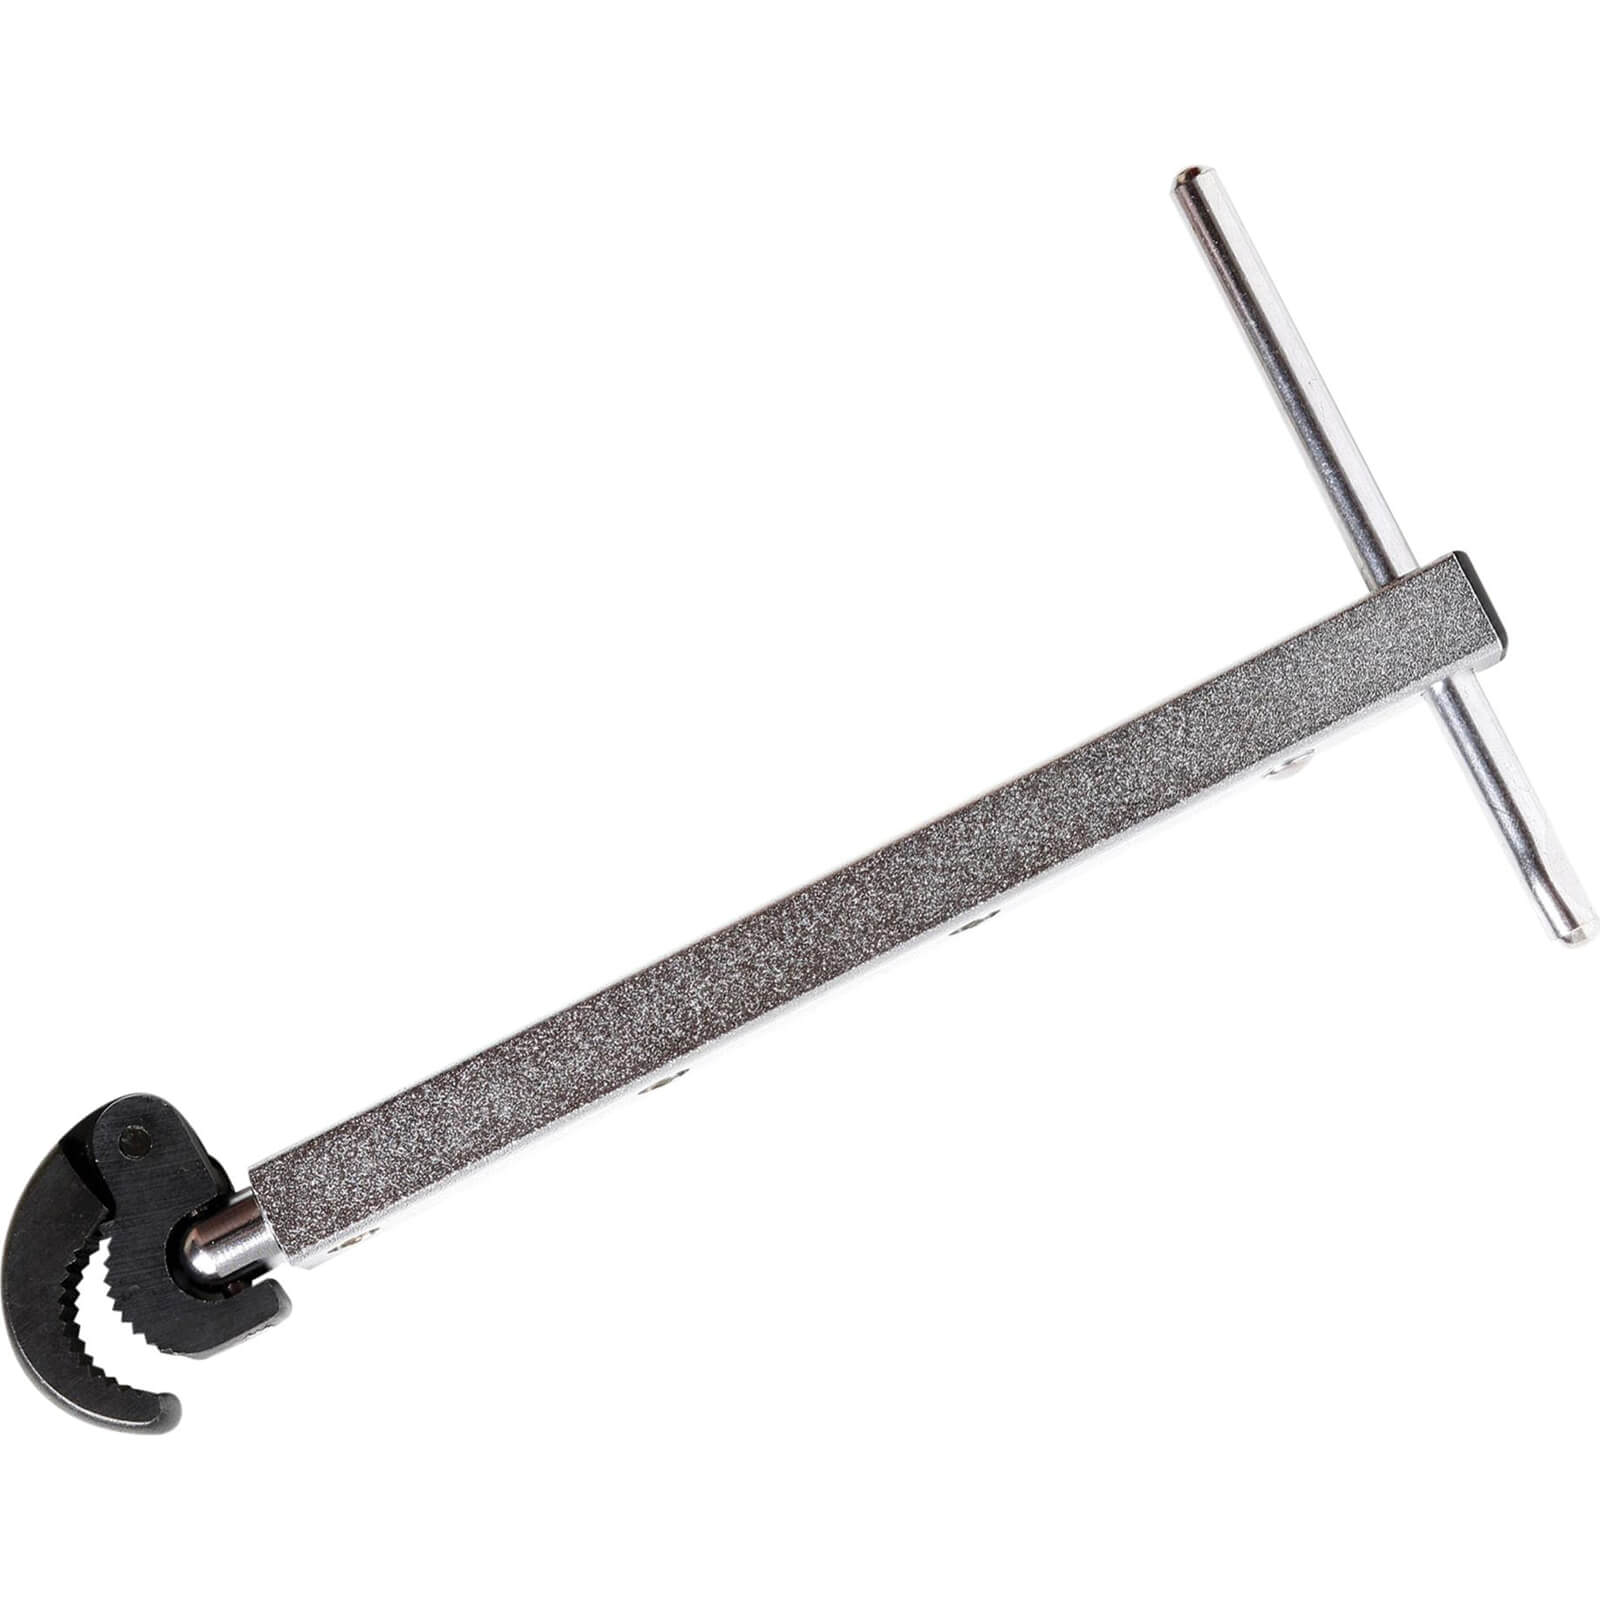 Bahco Telescopic Basin Wrench 10mm - 32mm